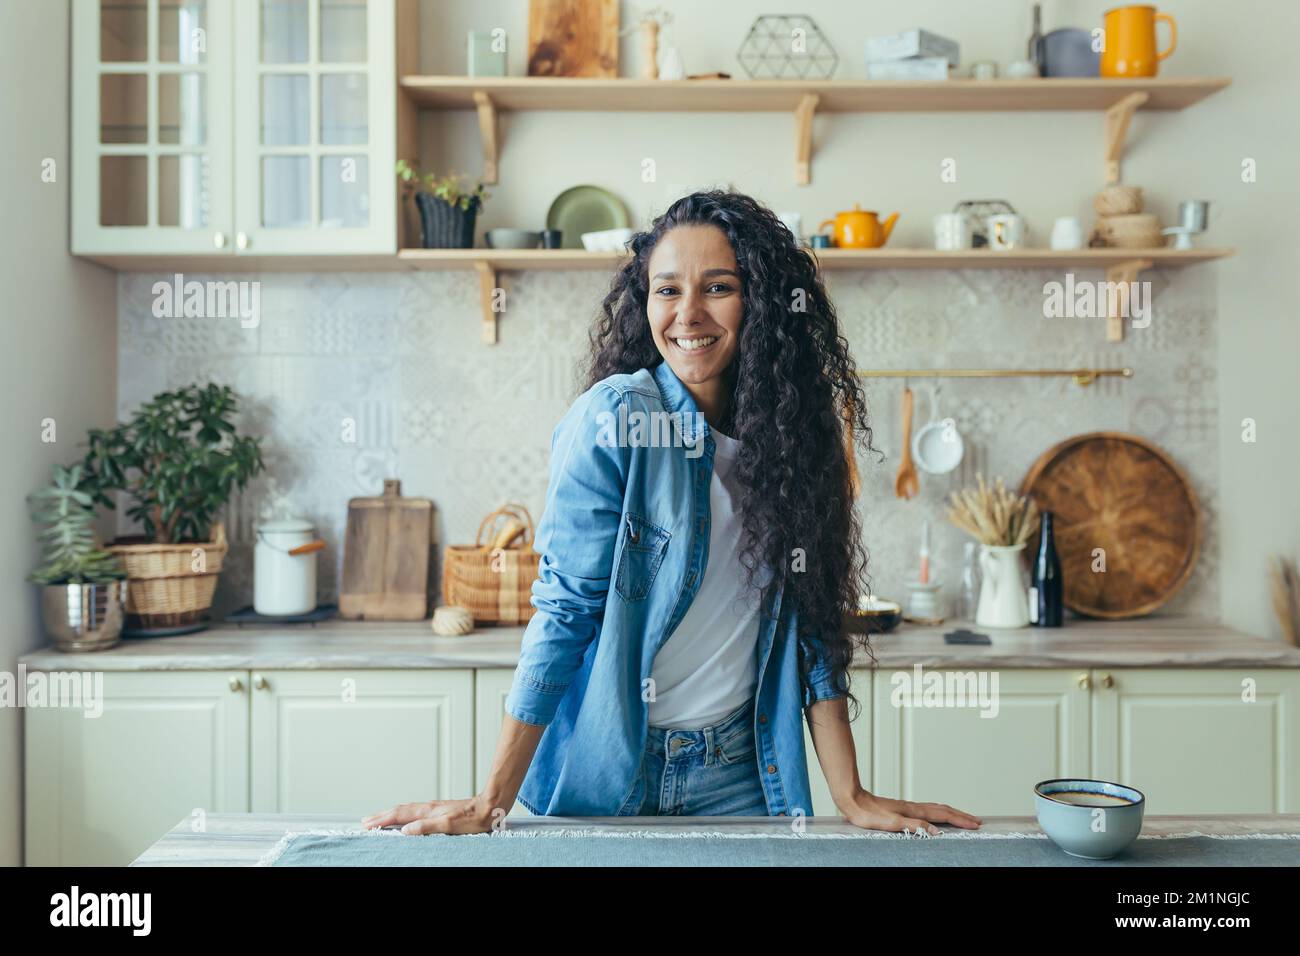 Portrait of happy hispanic woman at home in kitchen, woman with curly hair smiling and looking at camera. Stock Photo